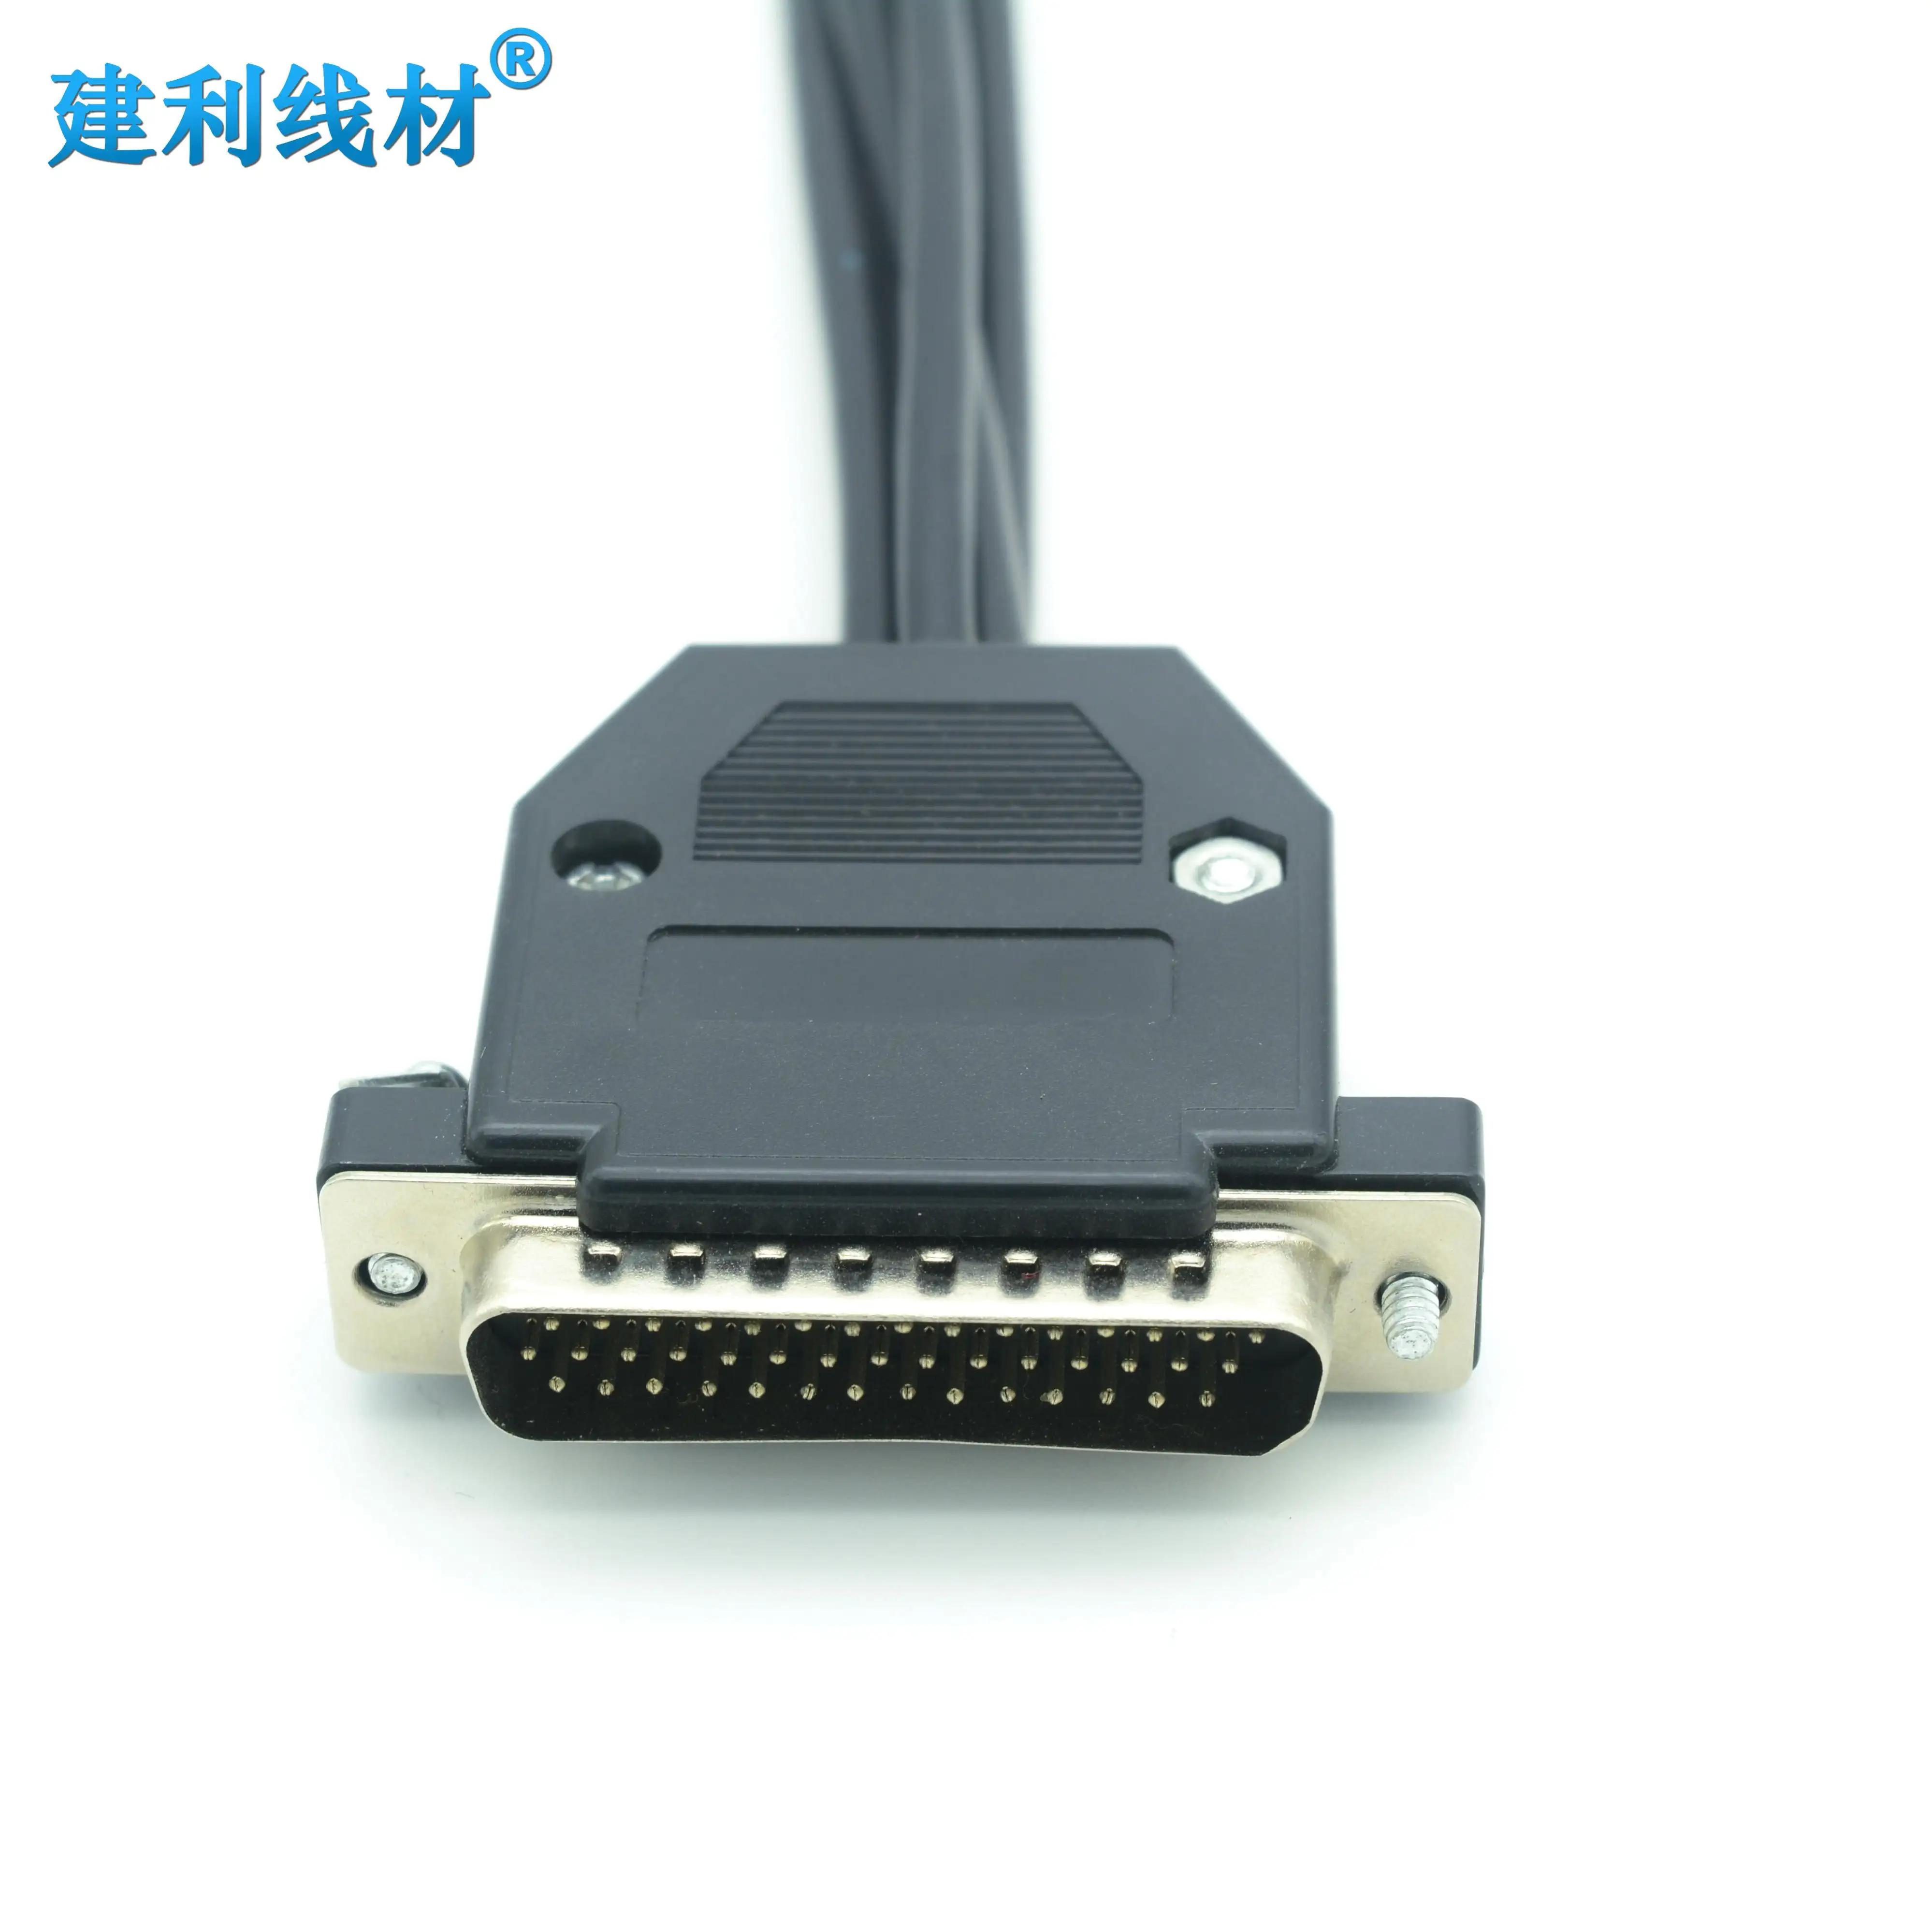 DP 44-Pin Plug to 4x4-Pin Aviation Female + 6-Pin Aviation Female Multi-Camera MDVR/DVR for Vehicle for Car Monitor System